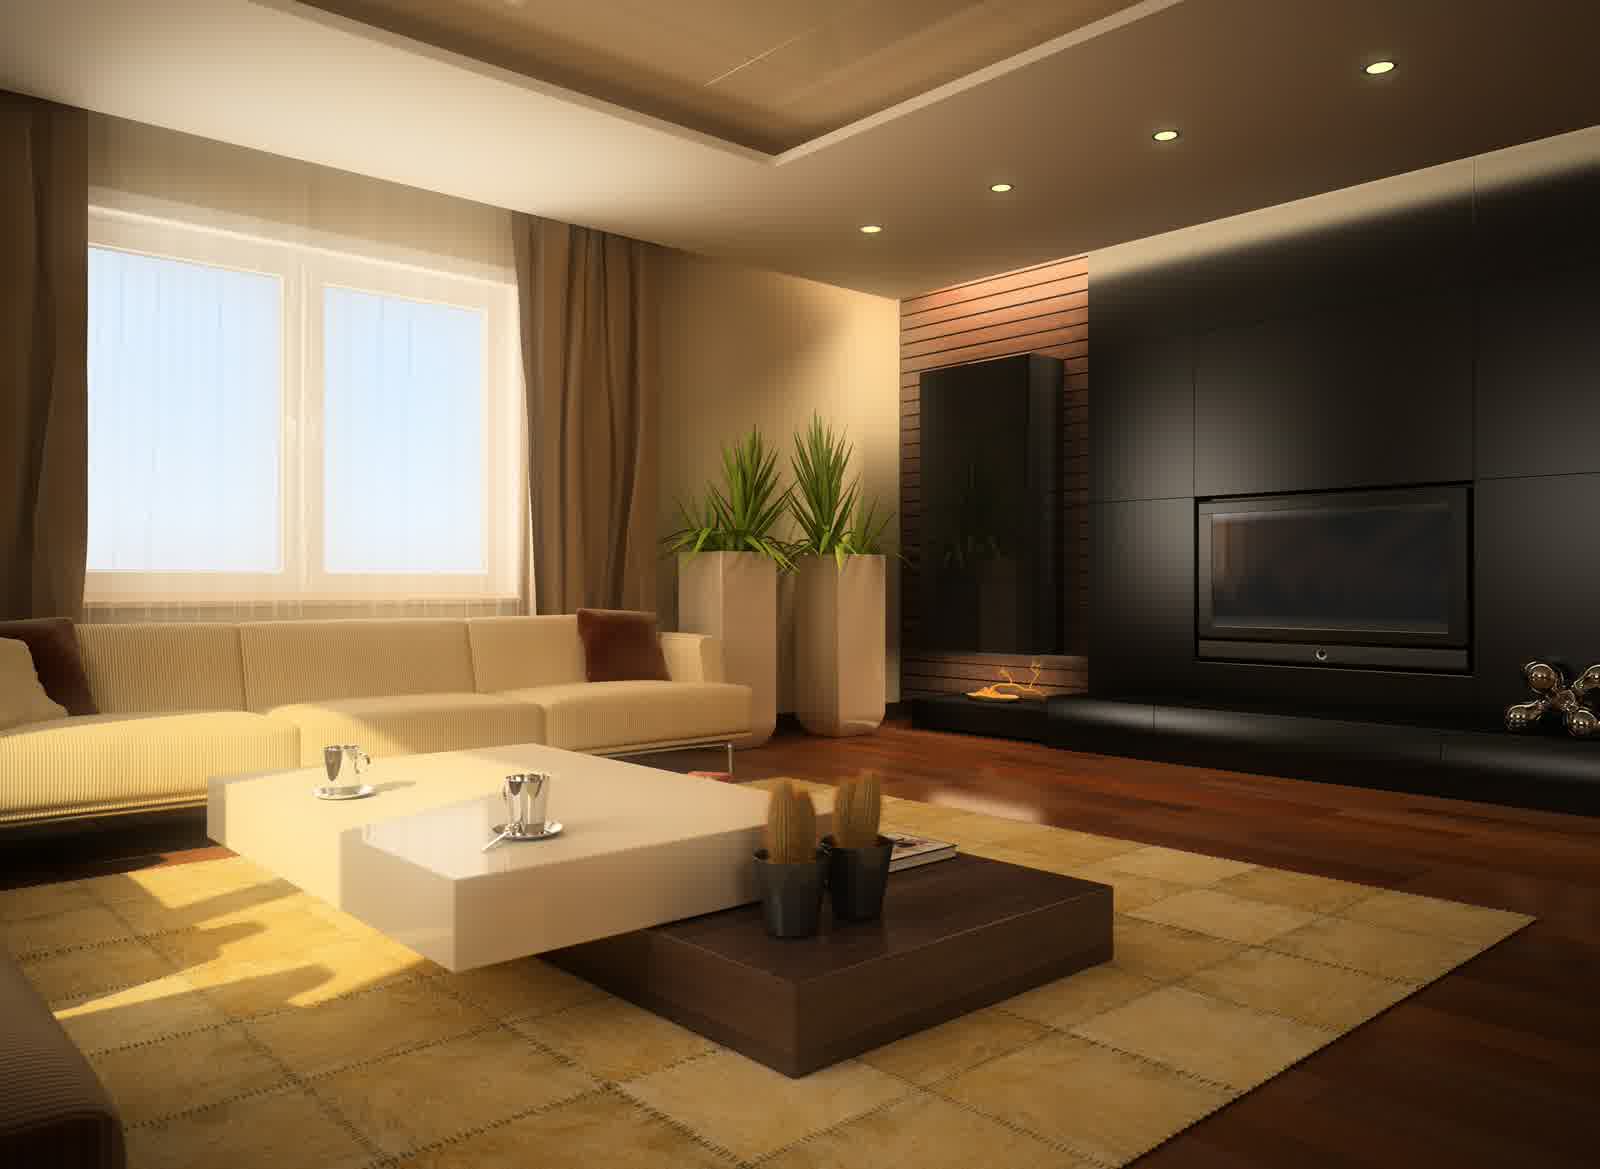 Modern Interior Design With Amazing Curtaim And Sofa Complete With Tv Screen And Elegance Paint Interior Design